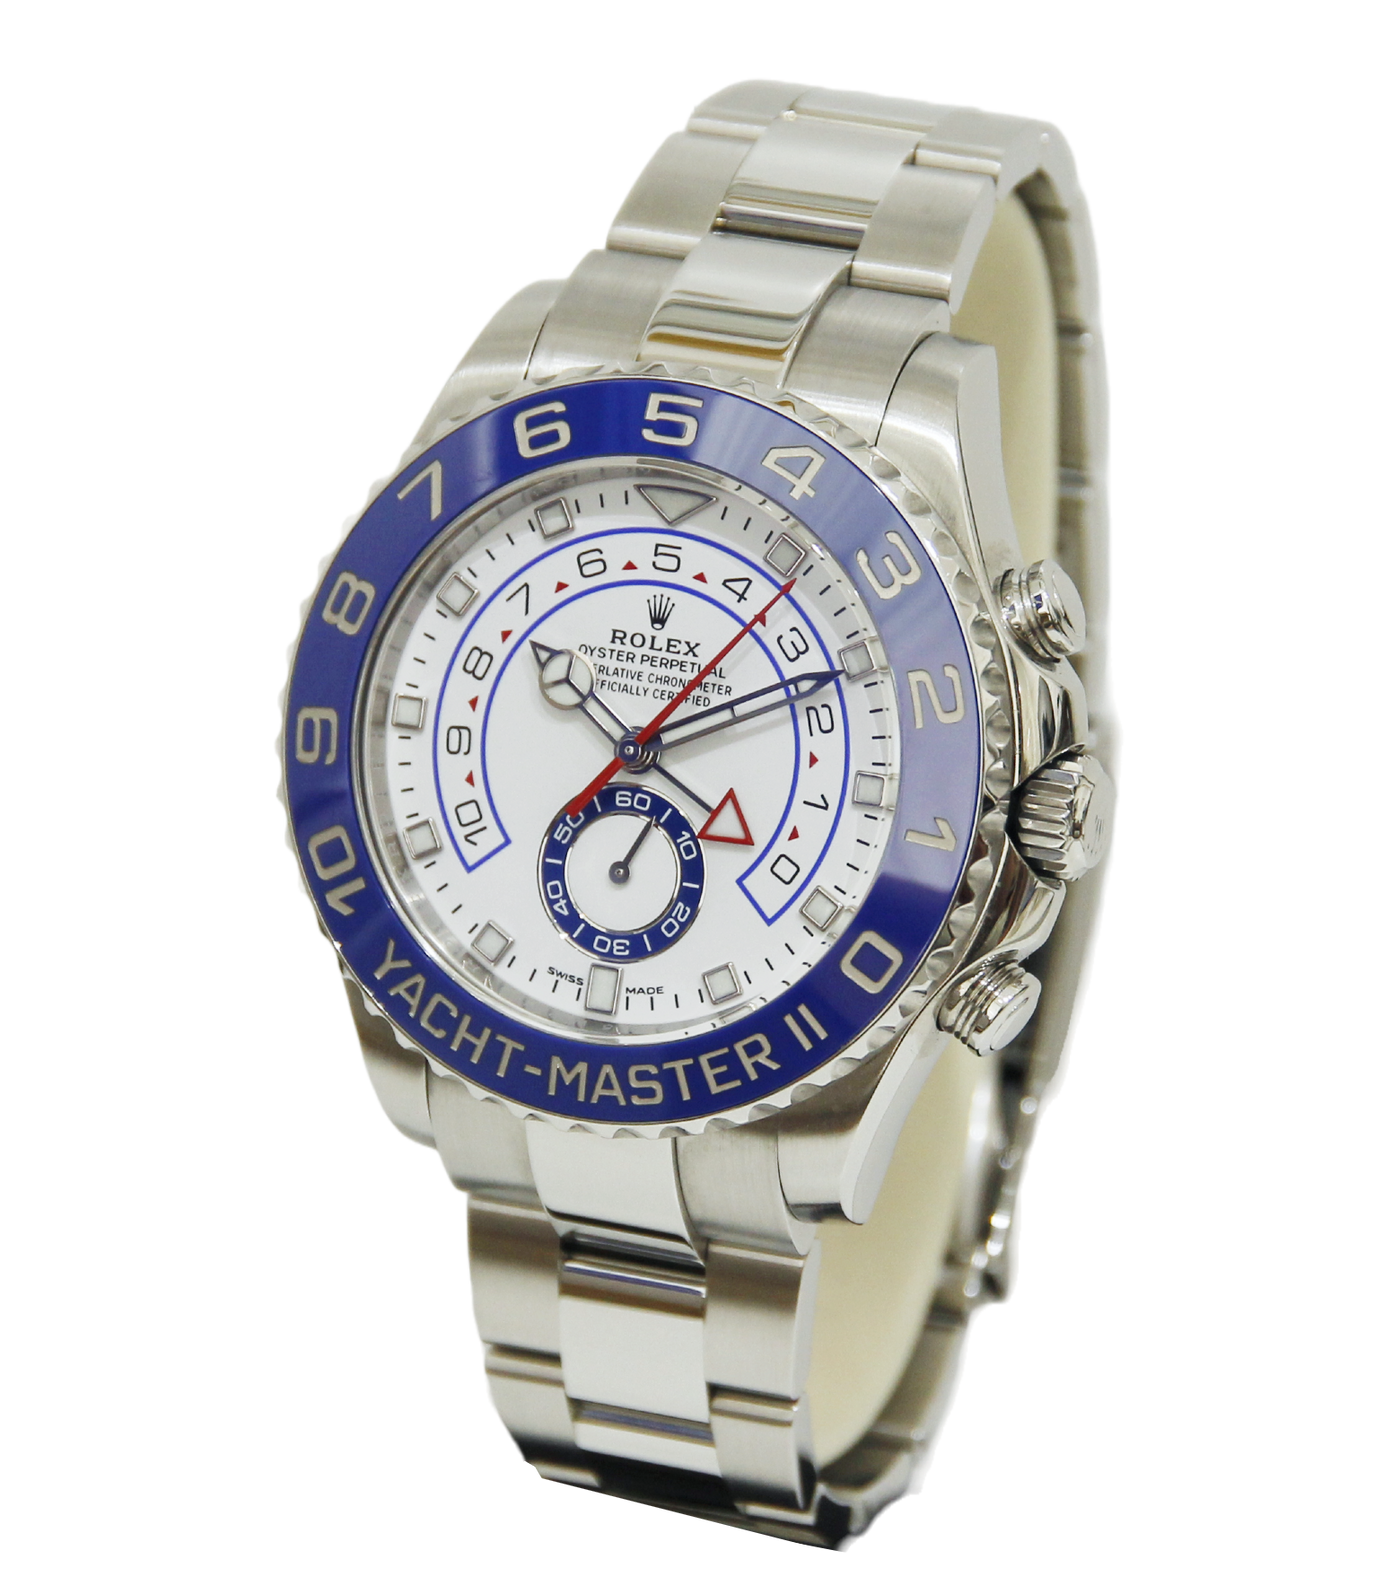 Rolex Yachtmaster II Stainless steel